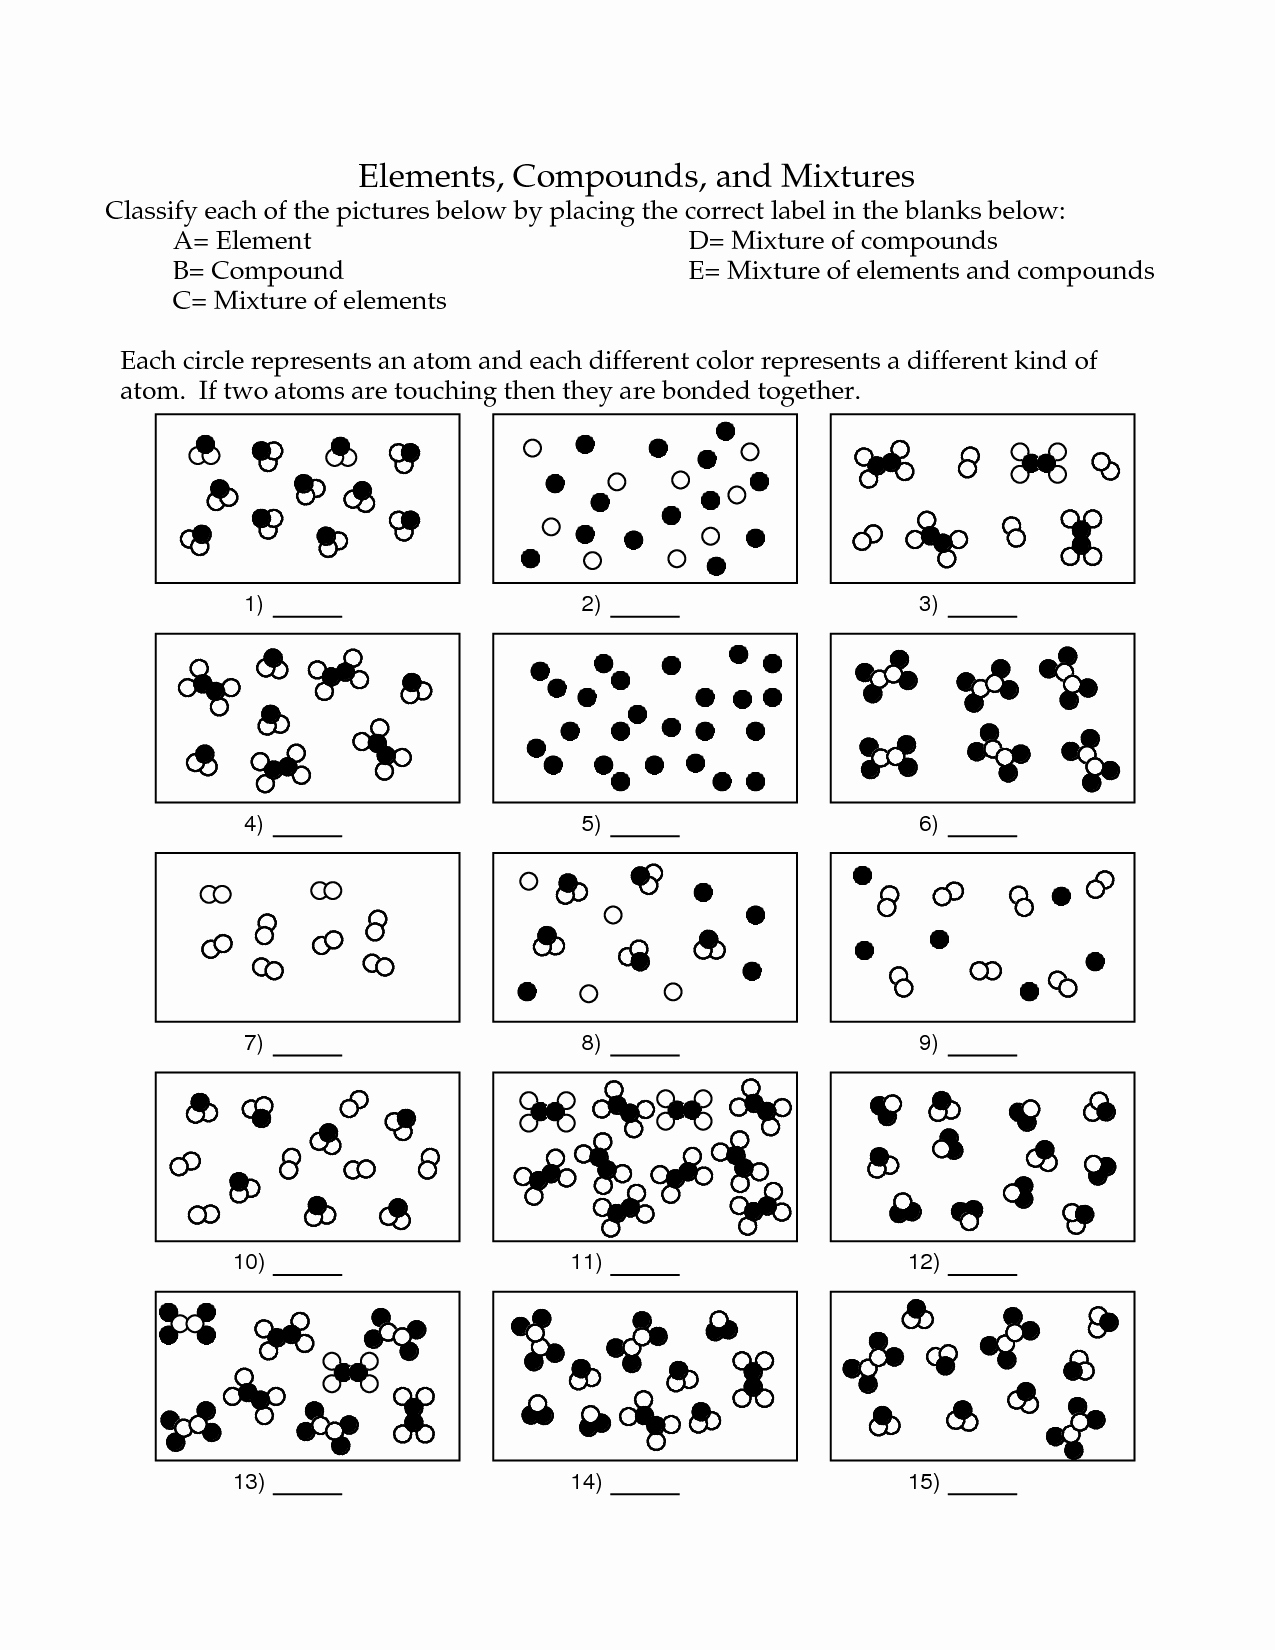 elements-compounds-and-mixtures-1-worksheet-answers-db-excel